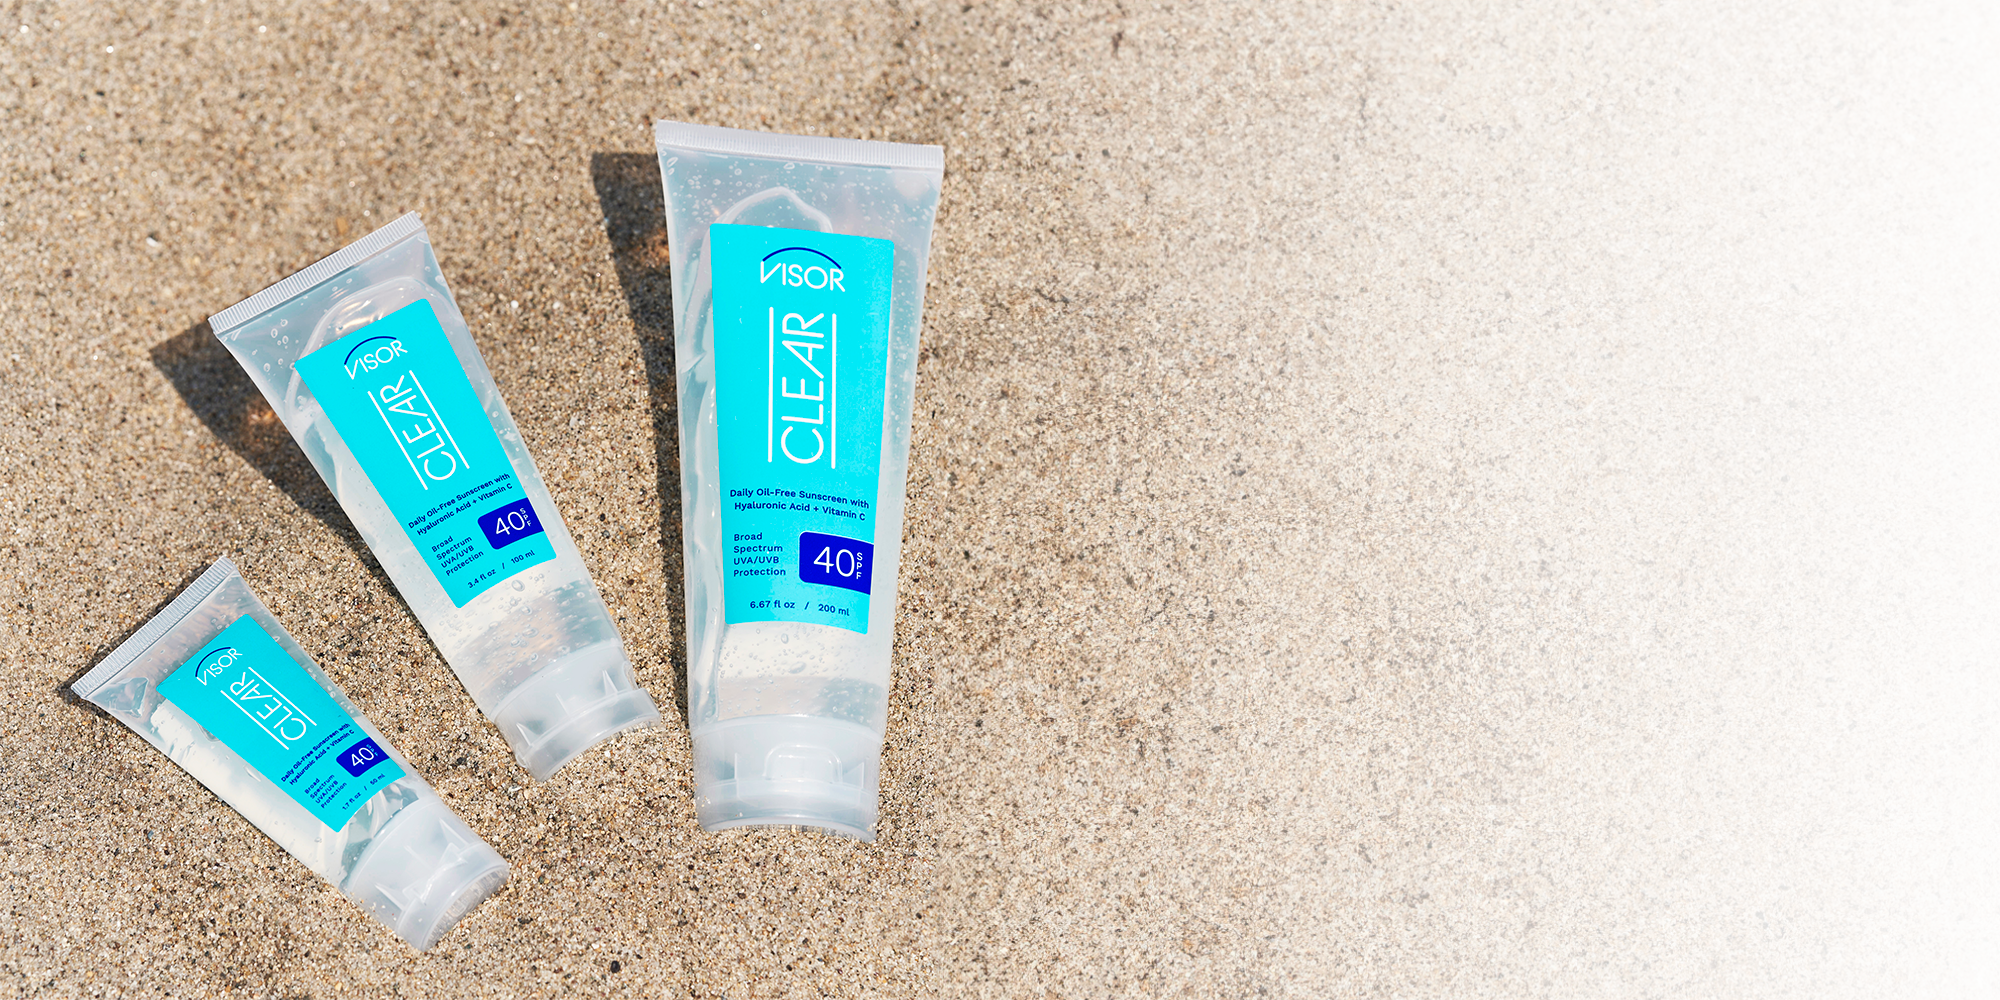 3 tubes of Visor CLEAR Sunscreen laying in sand